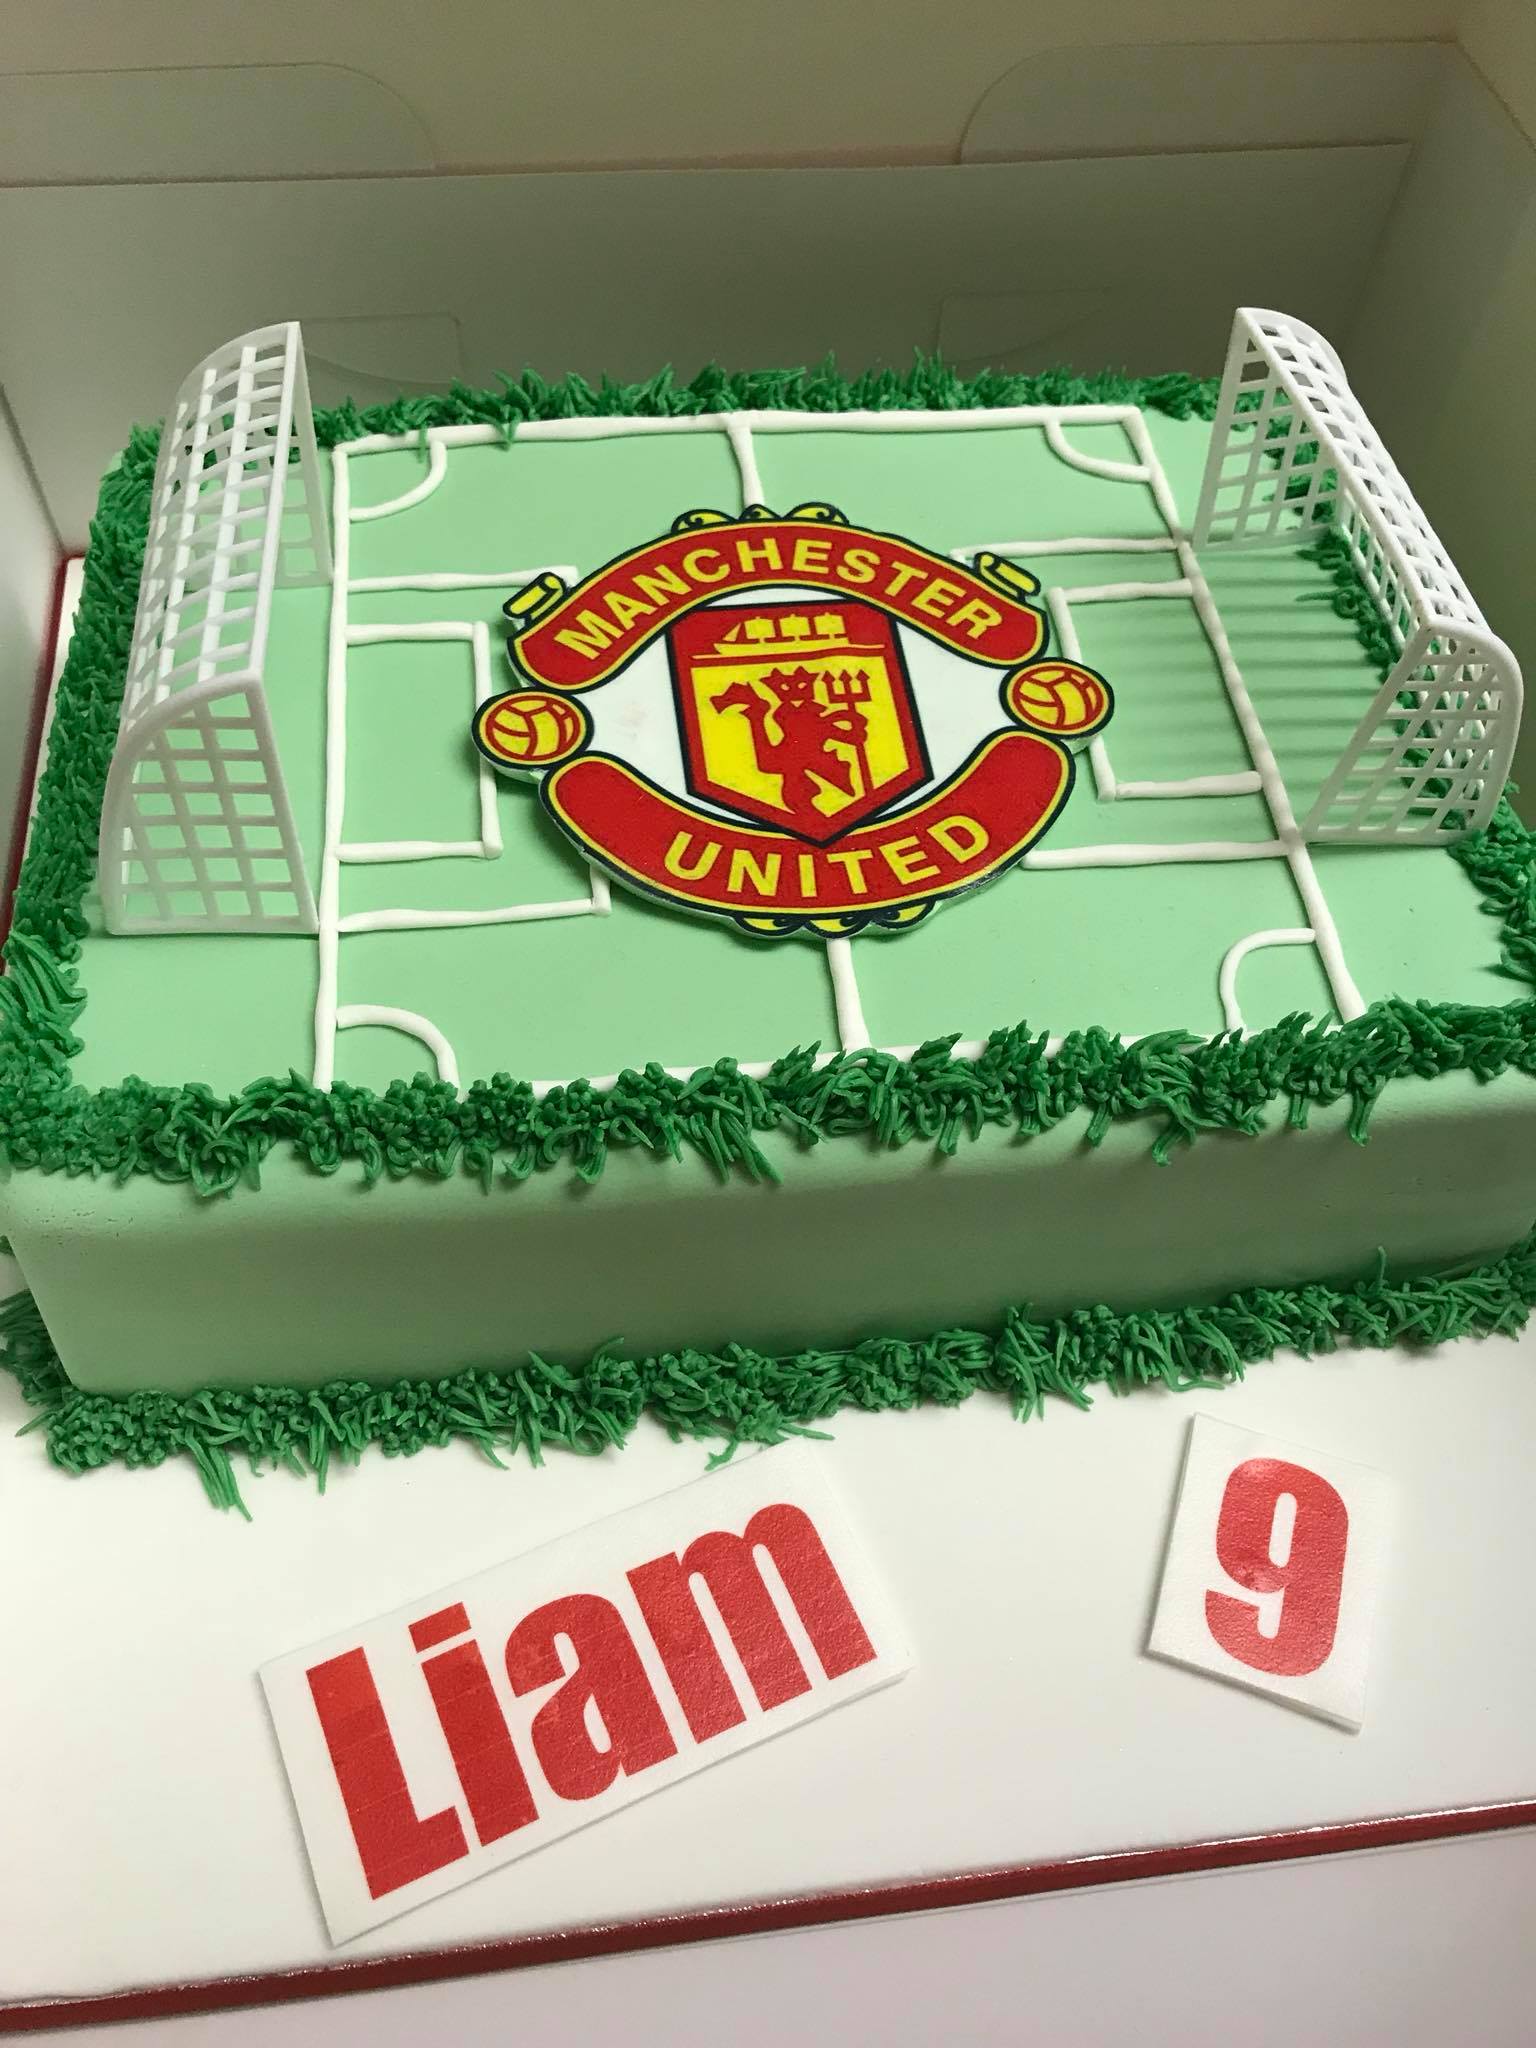 Birthday Cake Edible Image Manchester United Jersey | Flickr